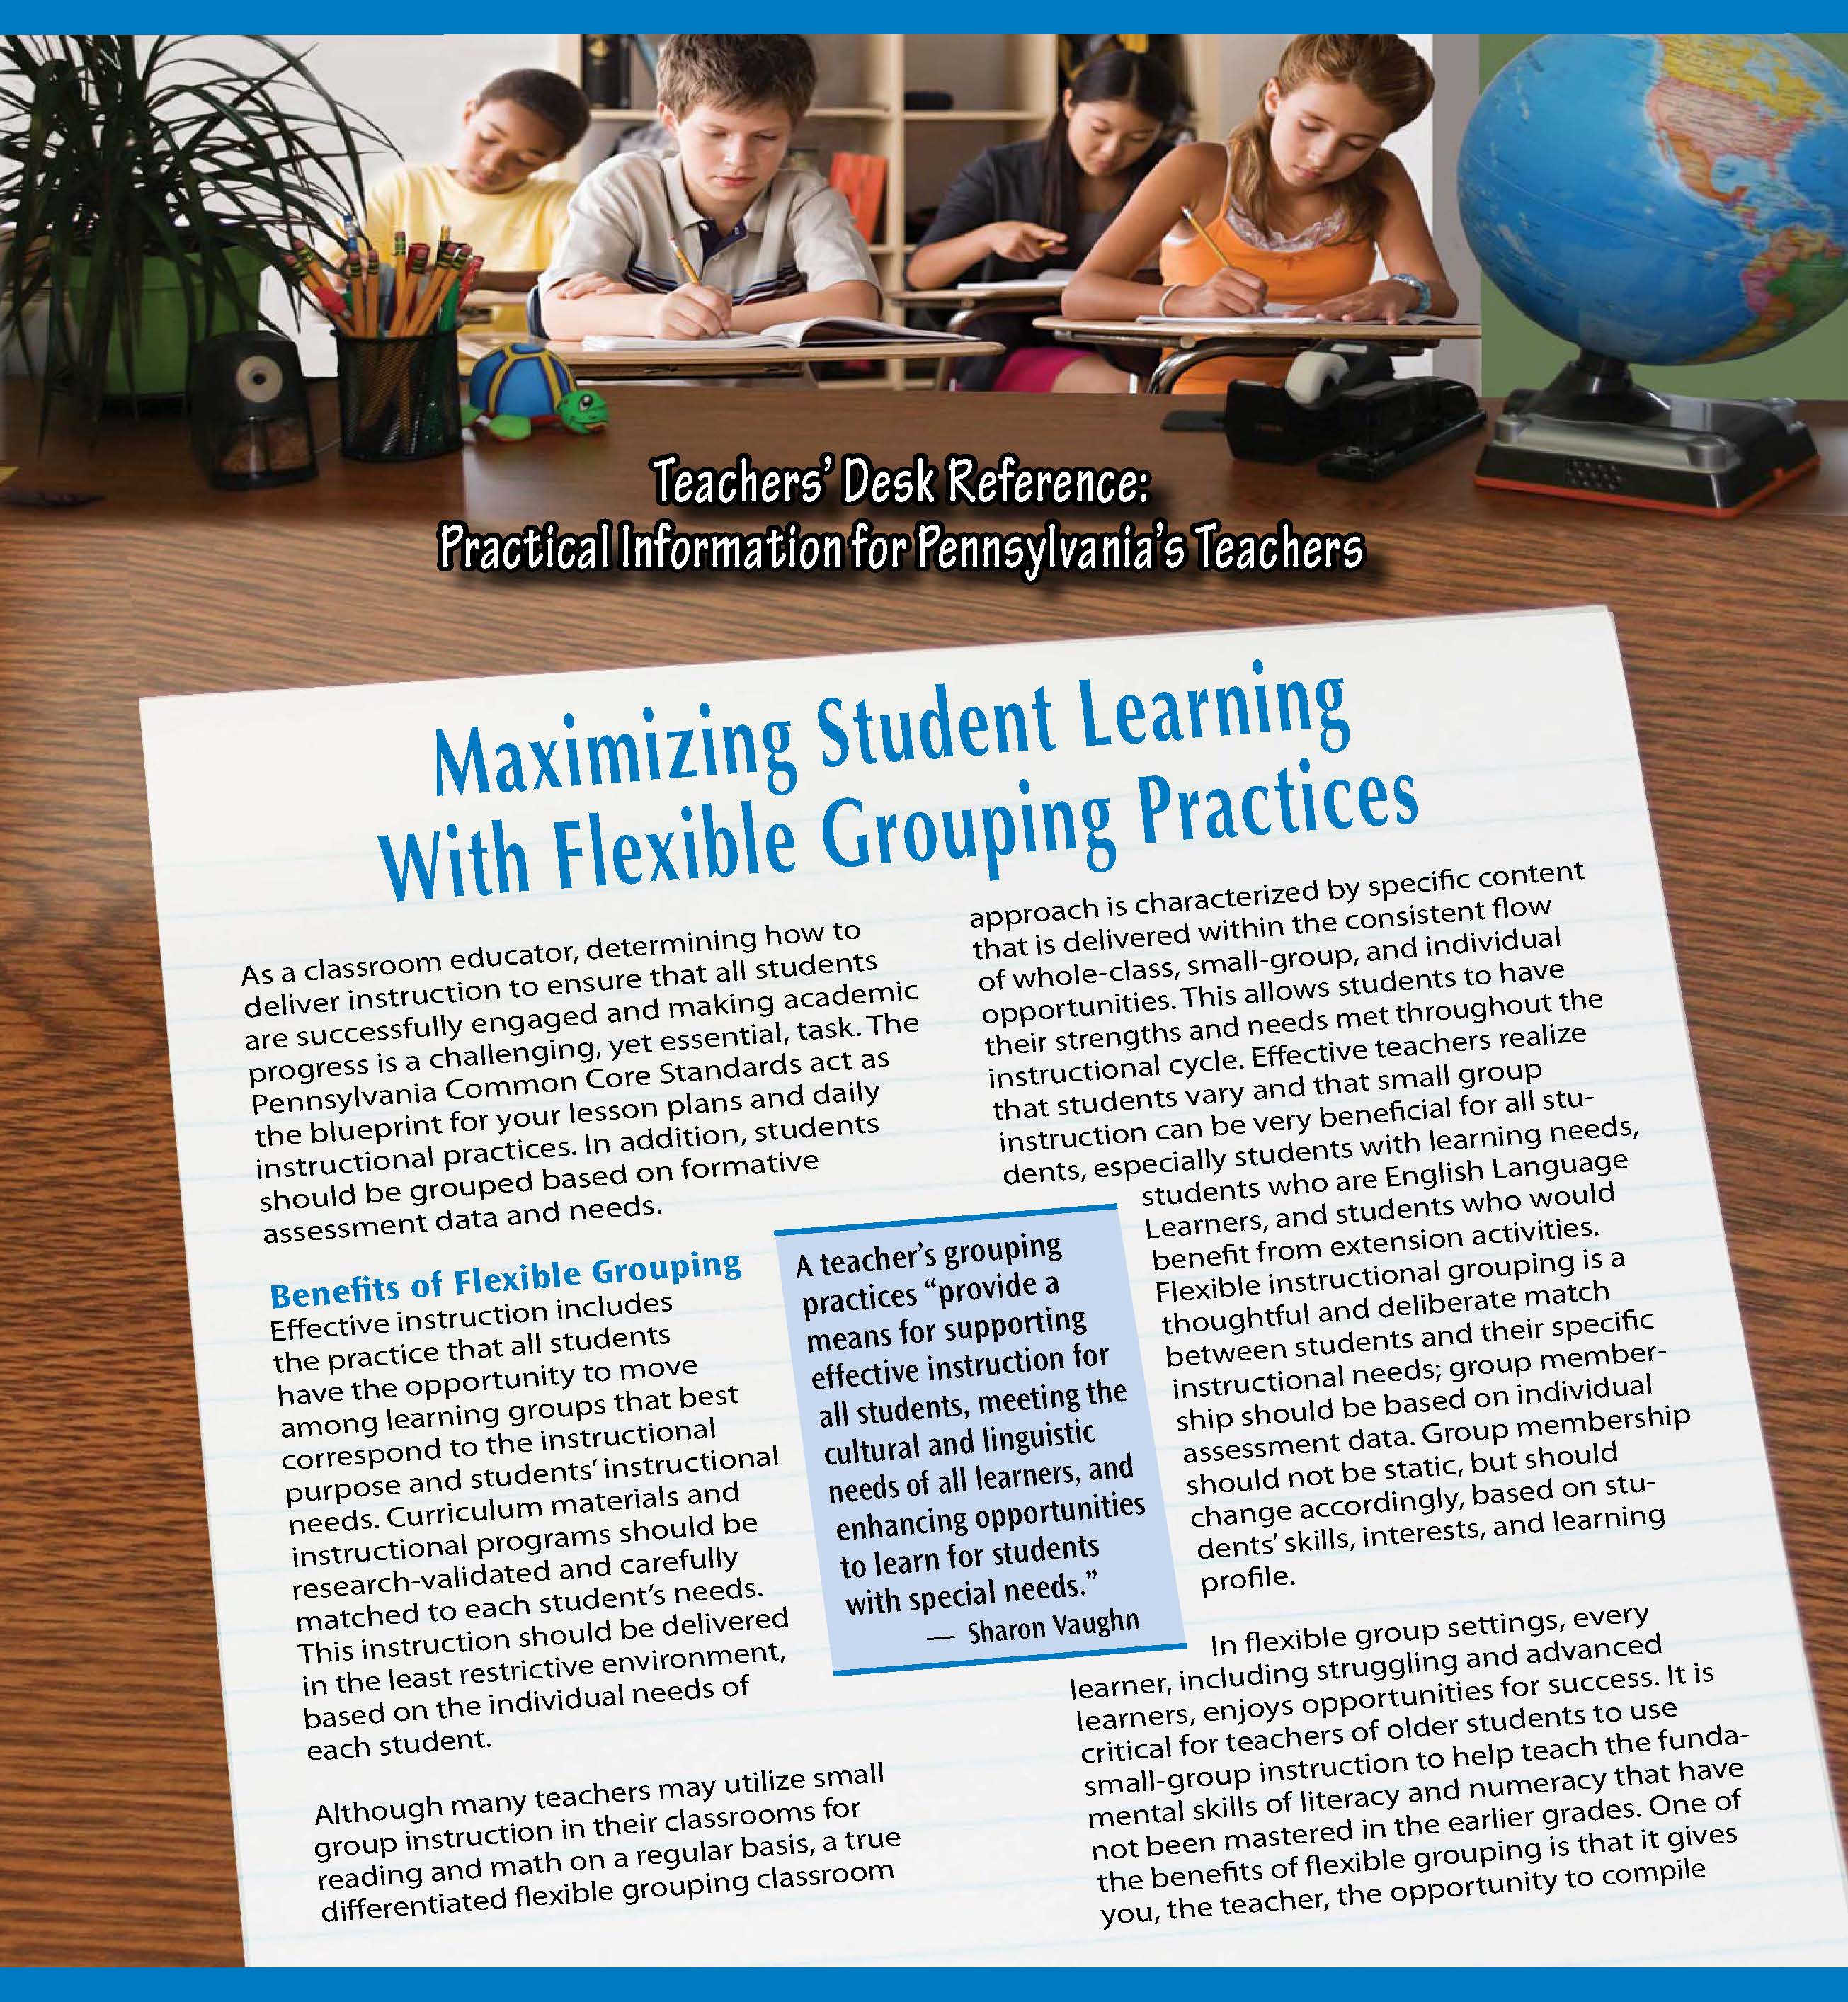 Teachers' Desk Reference: Maximizing Student Learning With Flexible Grouping Practices